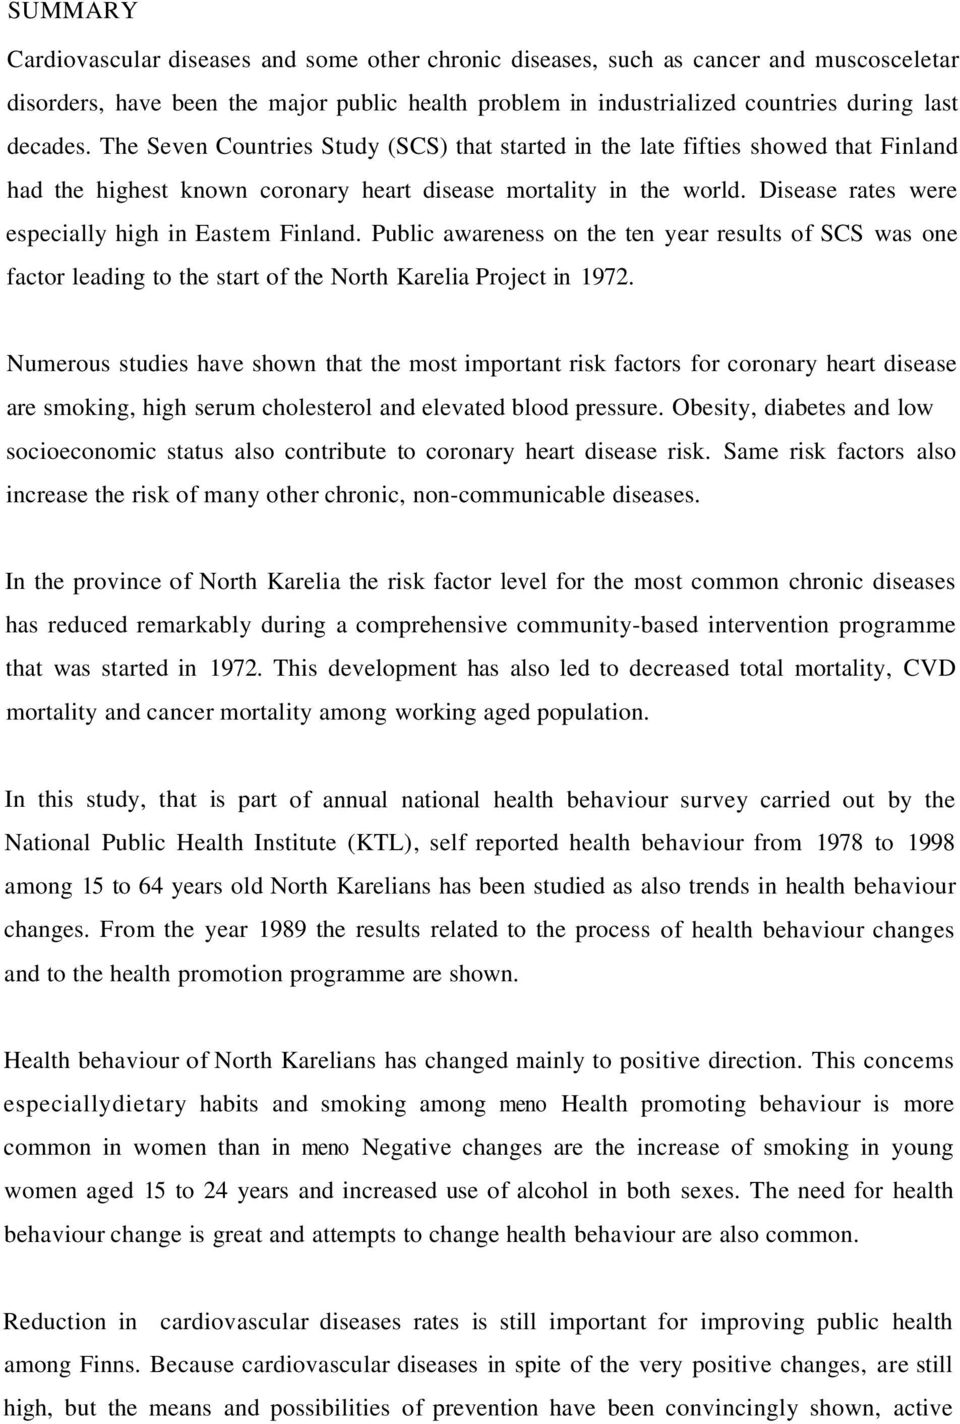 Disease rates were especially high in Eastem Finland. Public awareness on the ten year results of SCS was one factor leading to the start of the North Karelia Project in 1972.